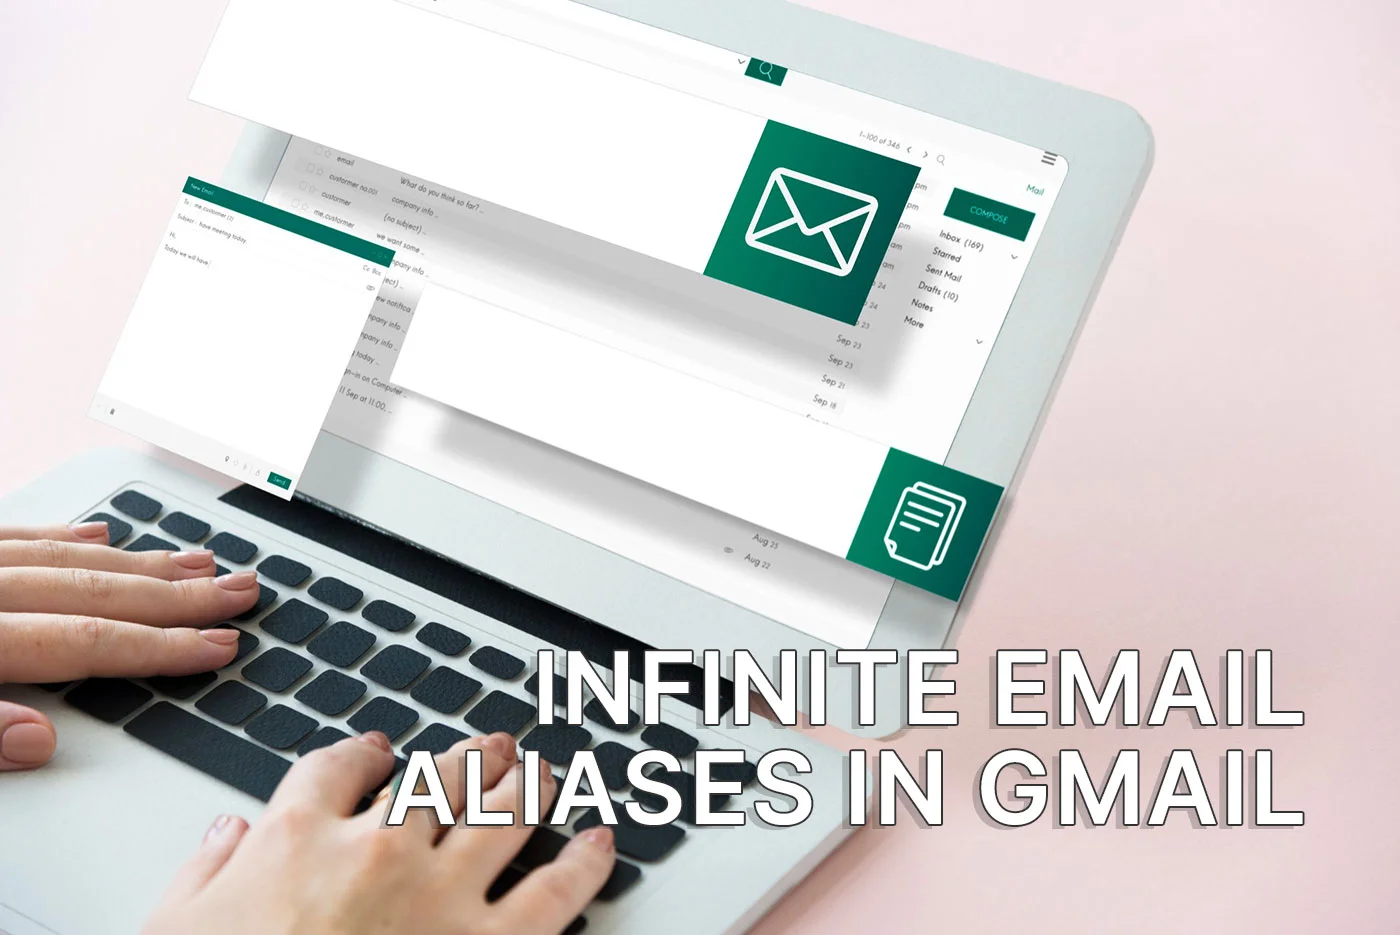 How to create and use infinite (∞) Gmail aliases